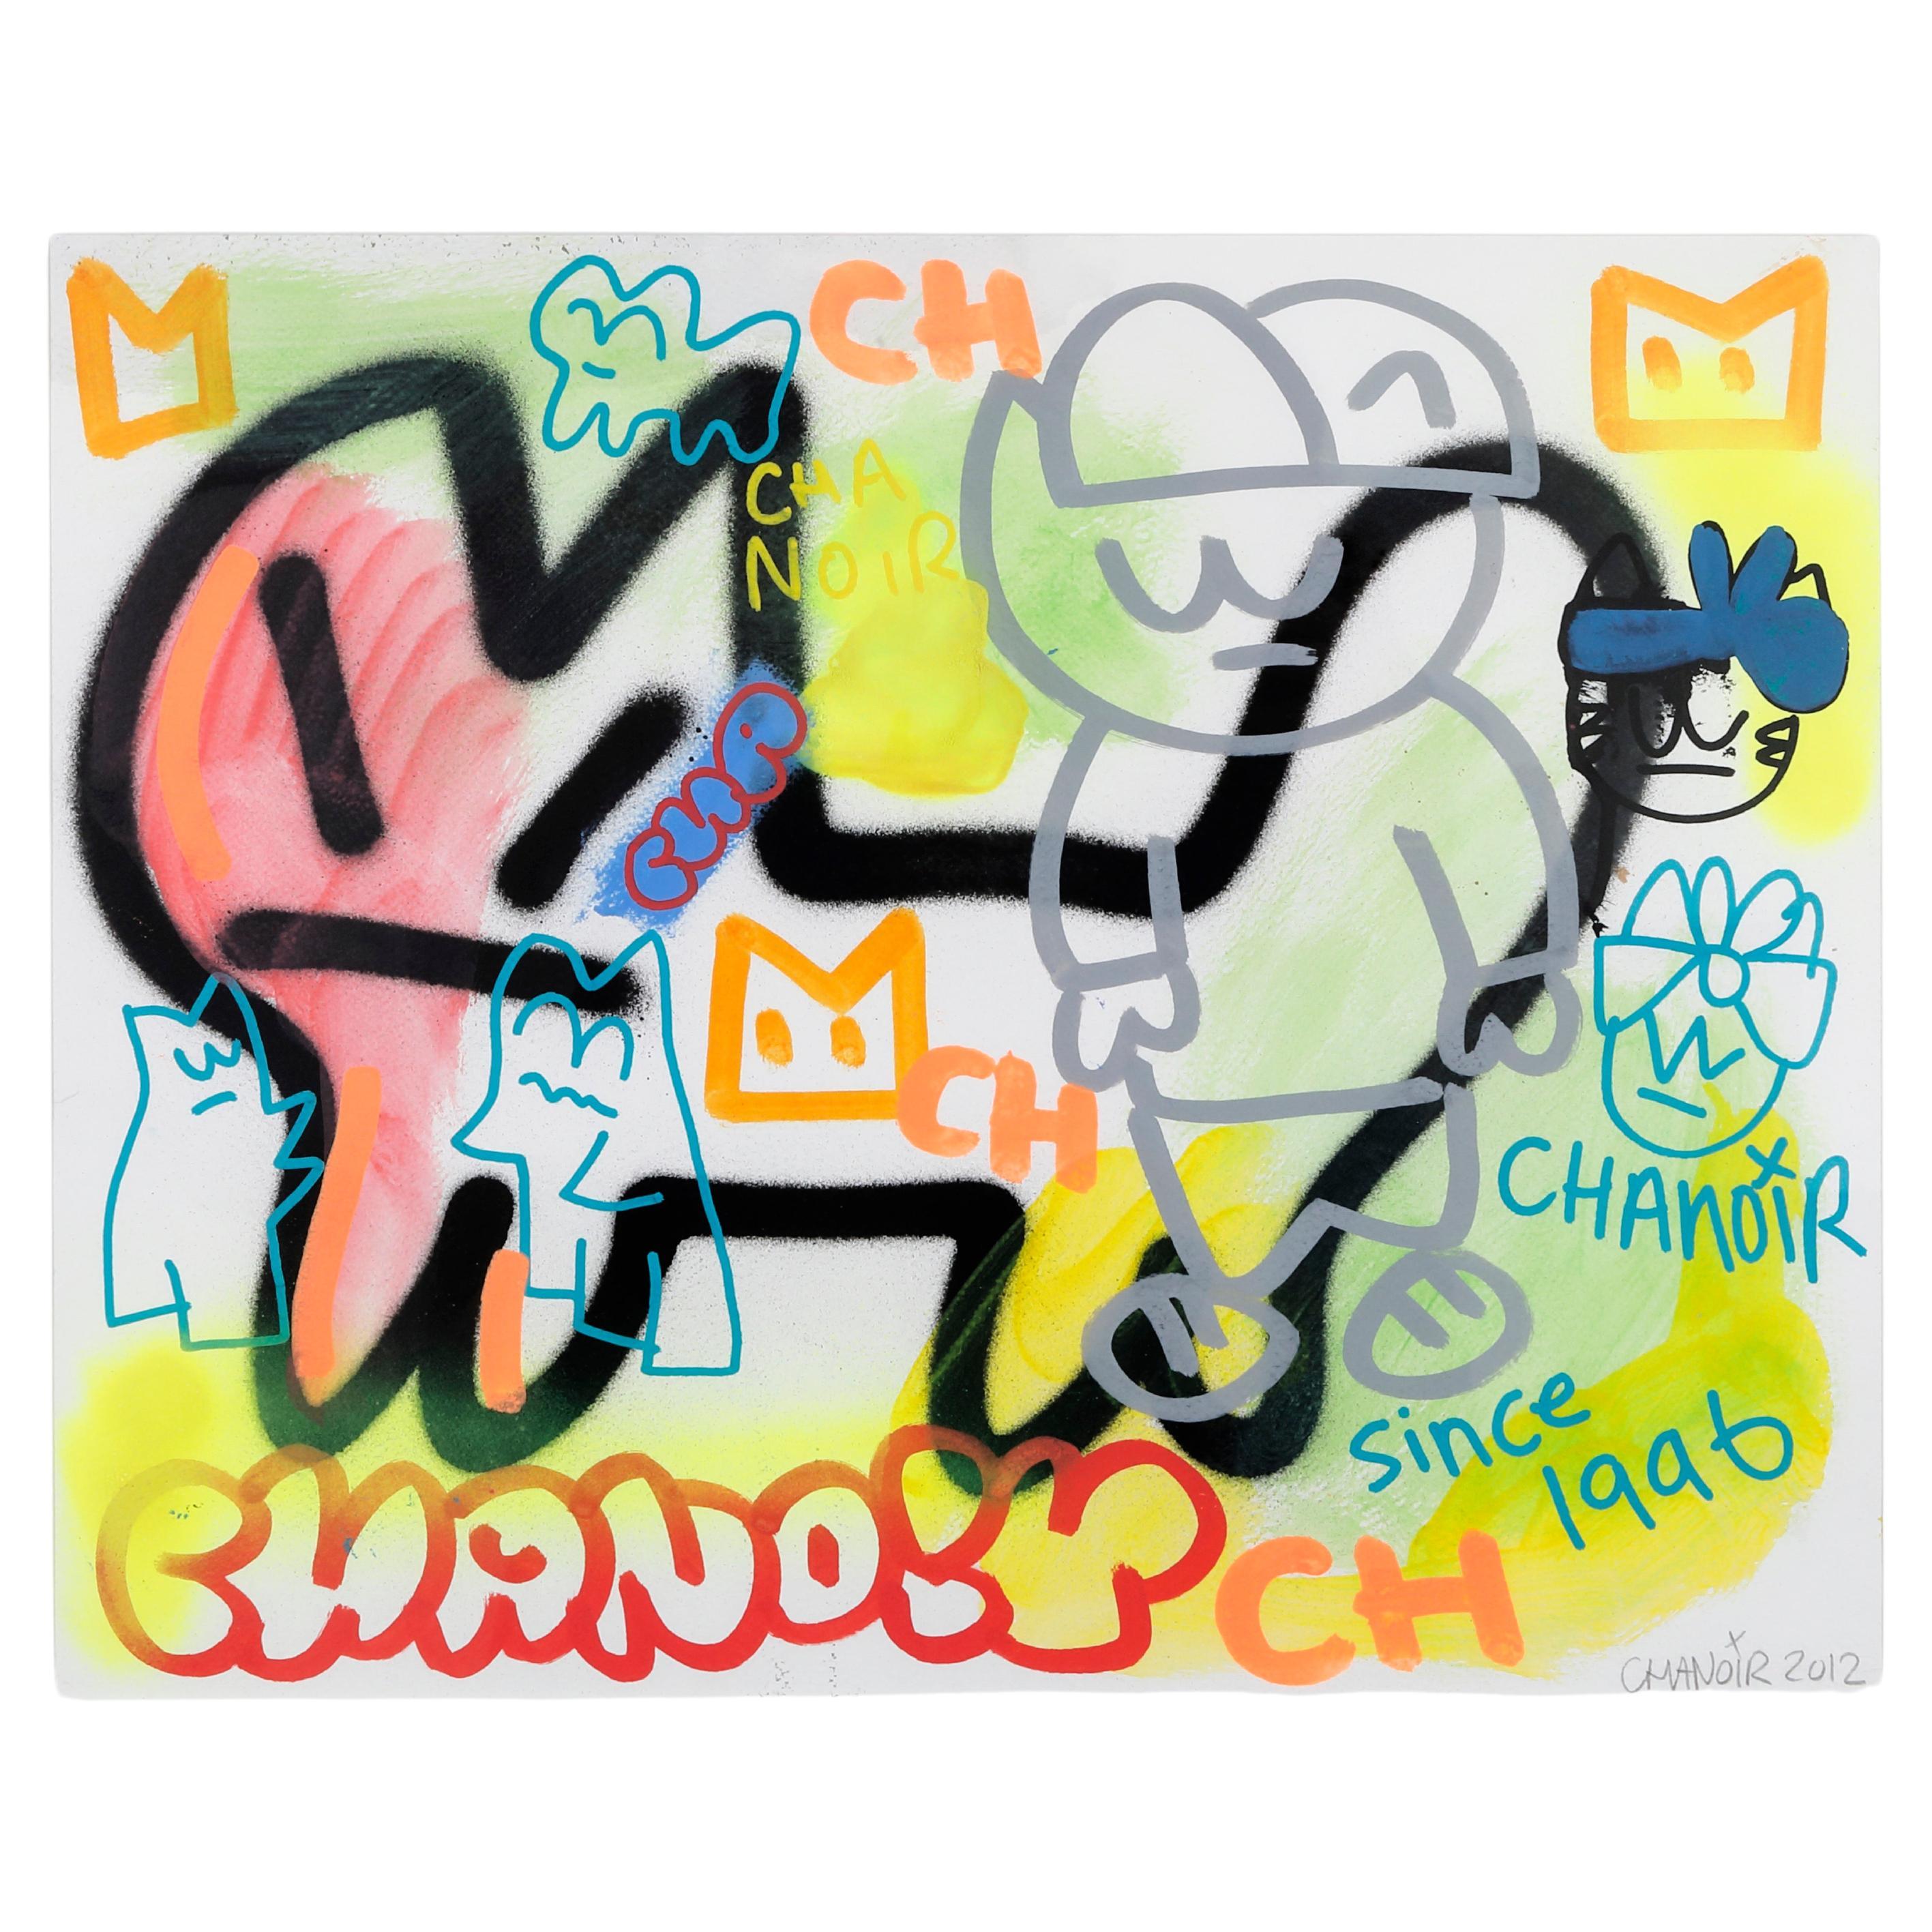 Chanoir artwork - Since 1996 - signed and dated